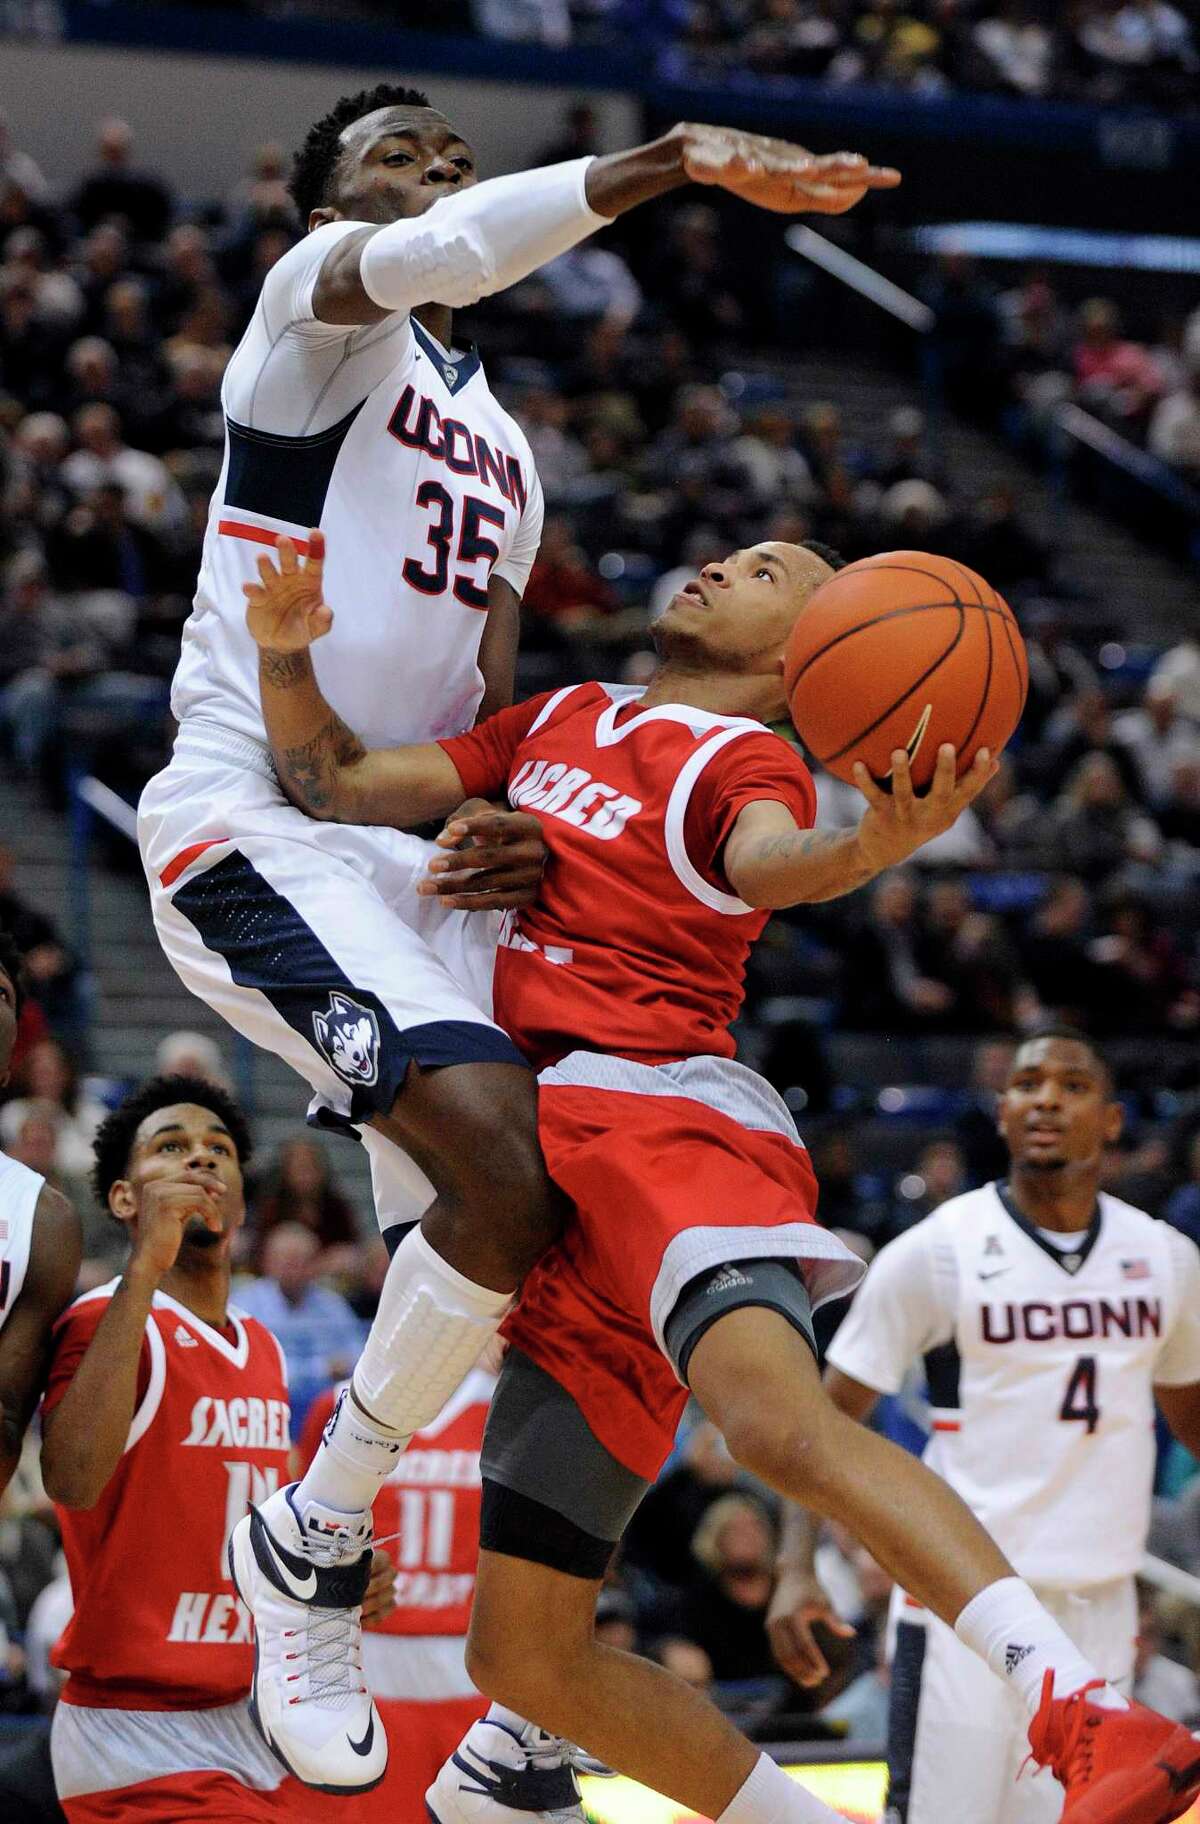 Connecticut’s Amida Brimah (35) guards Sacred Heart’s Cane Broome during the first half Wednesday.